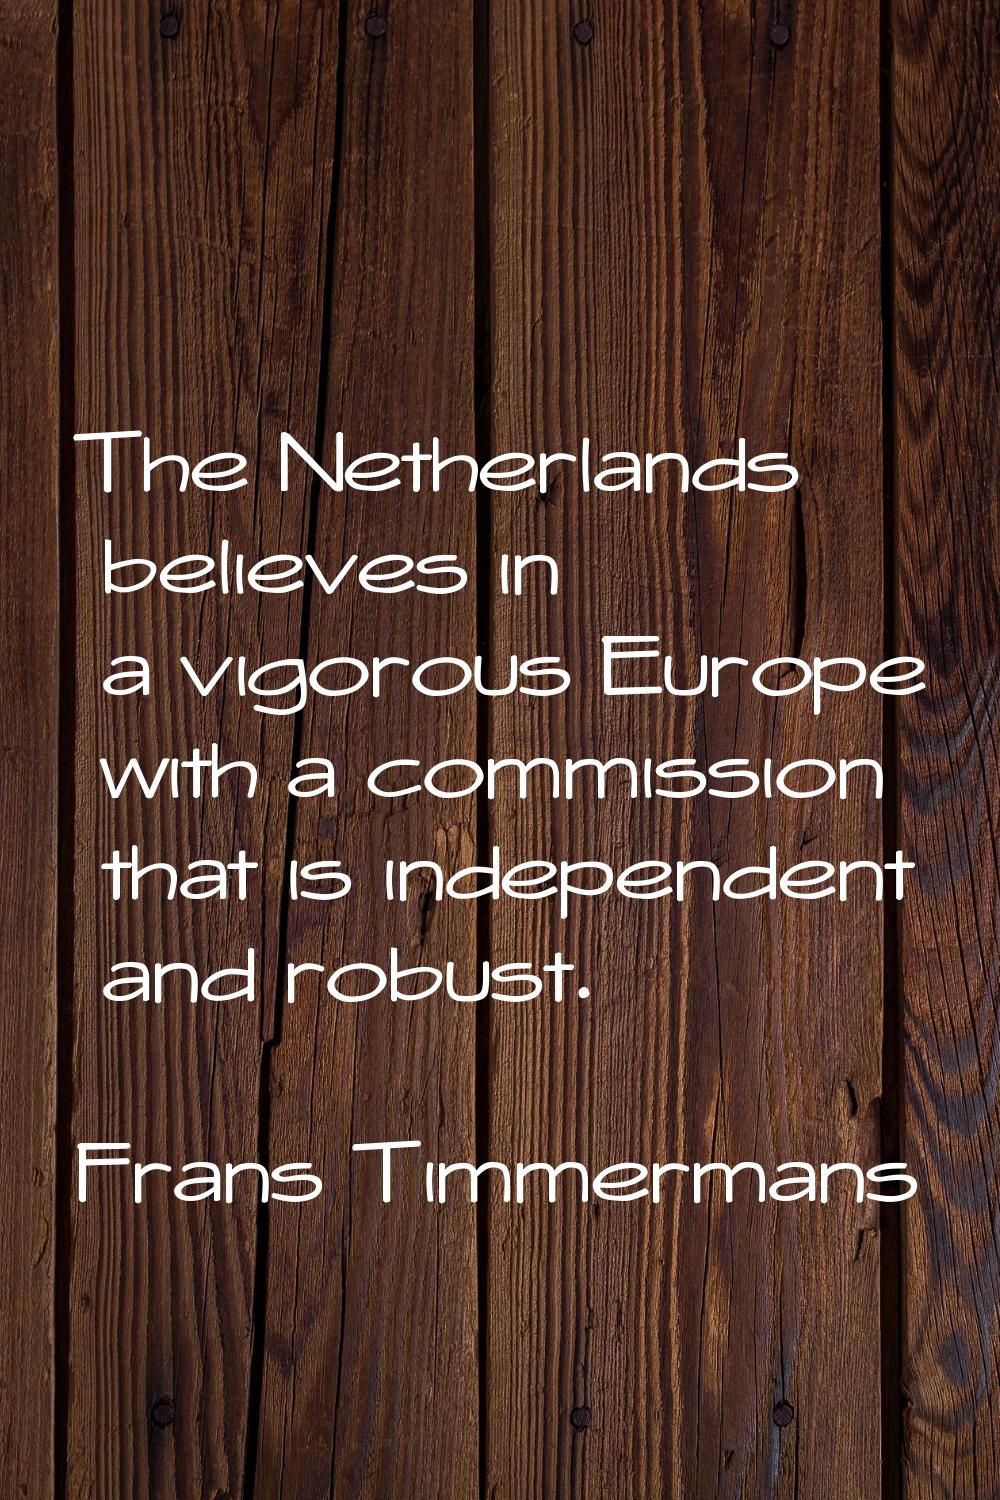 The Netherlands believes in a vigorous Europe with a commission that is independent and robust.